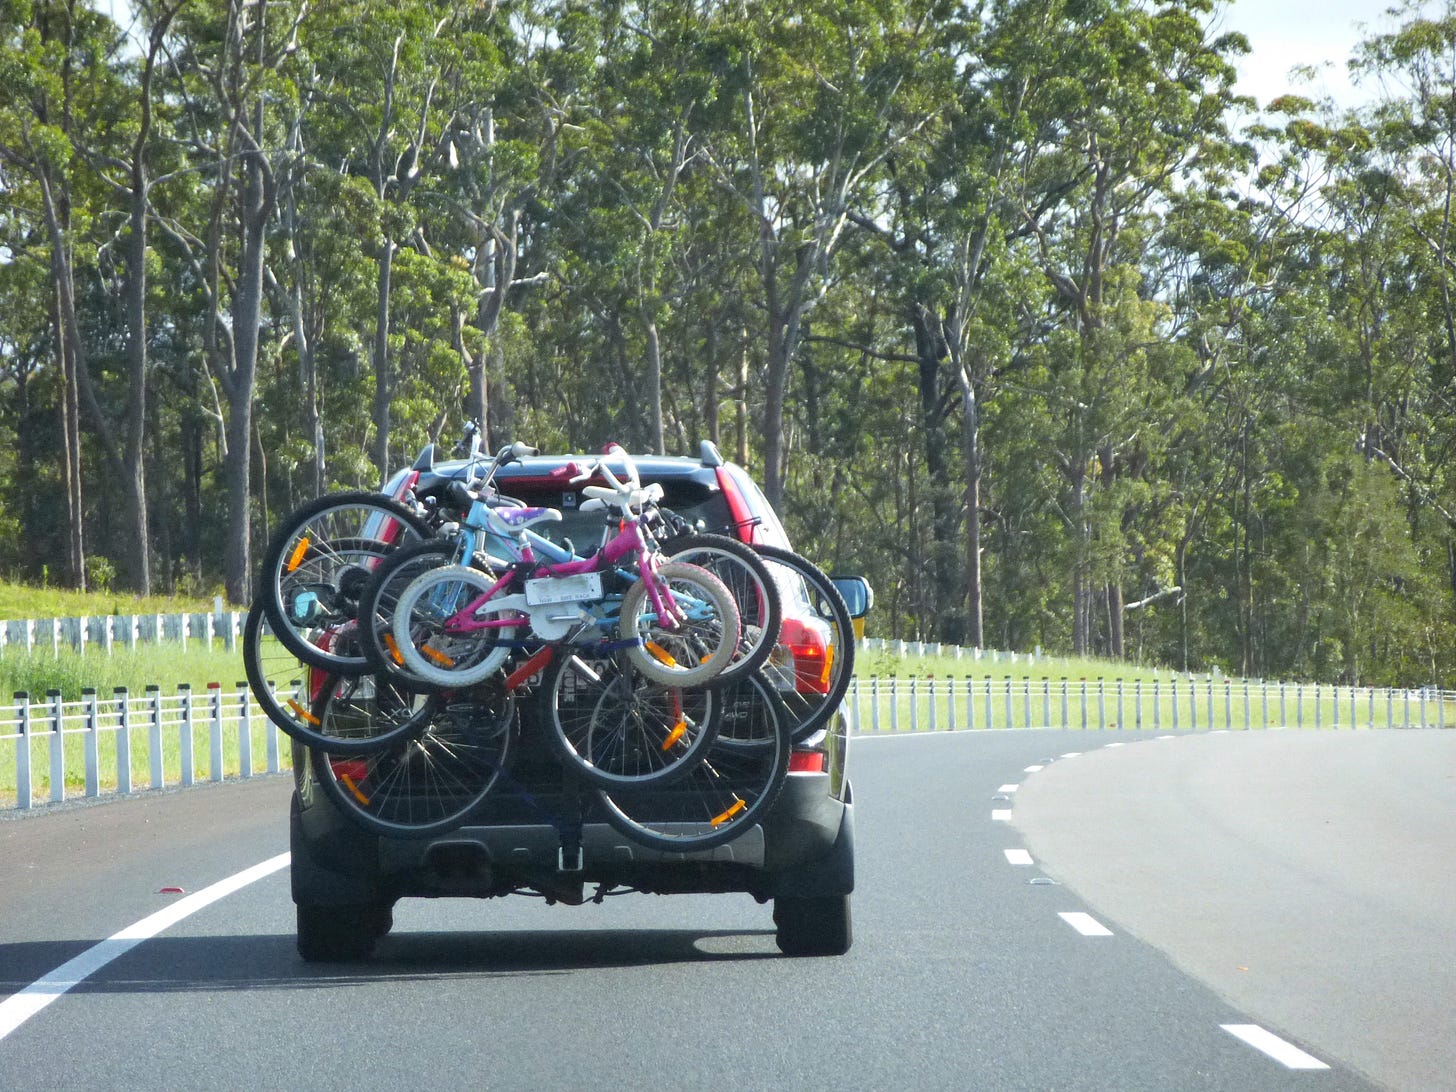 A car driving along a road, with several bicycles attached to the back